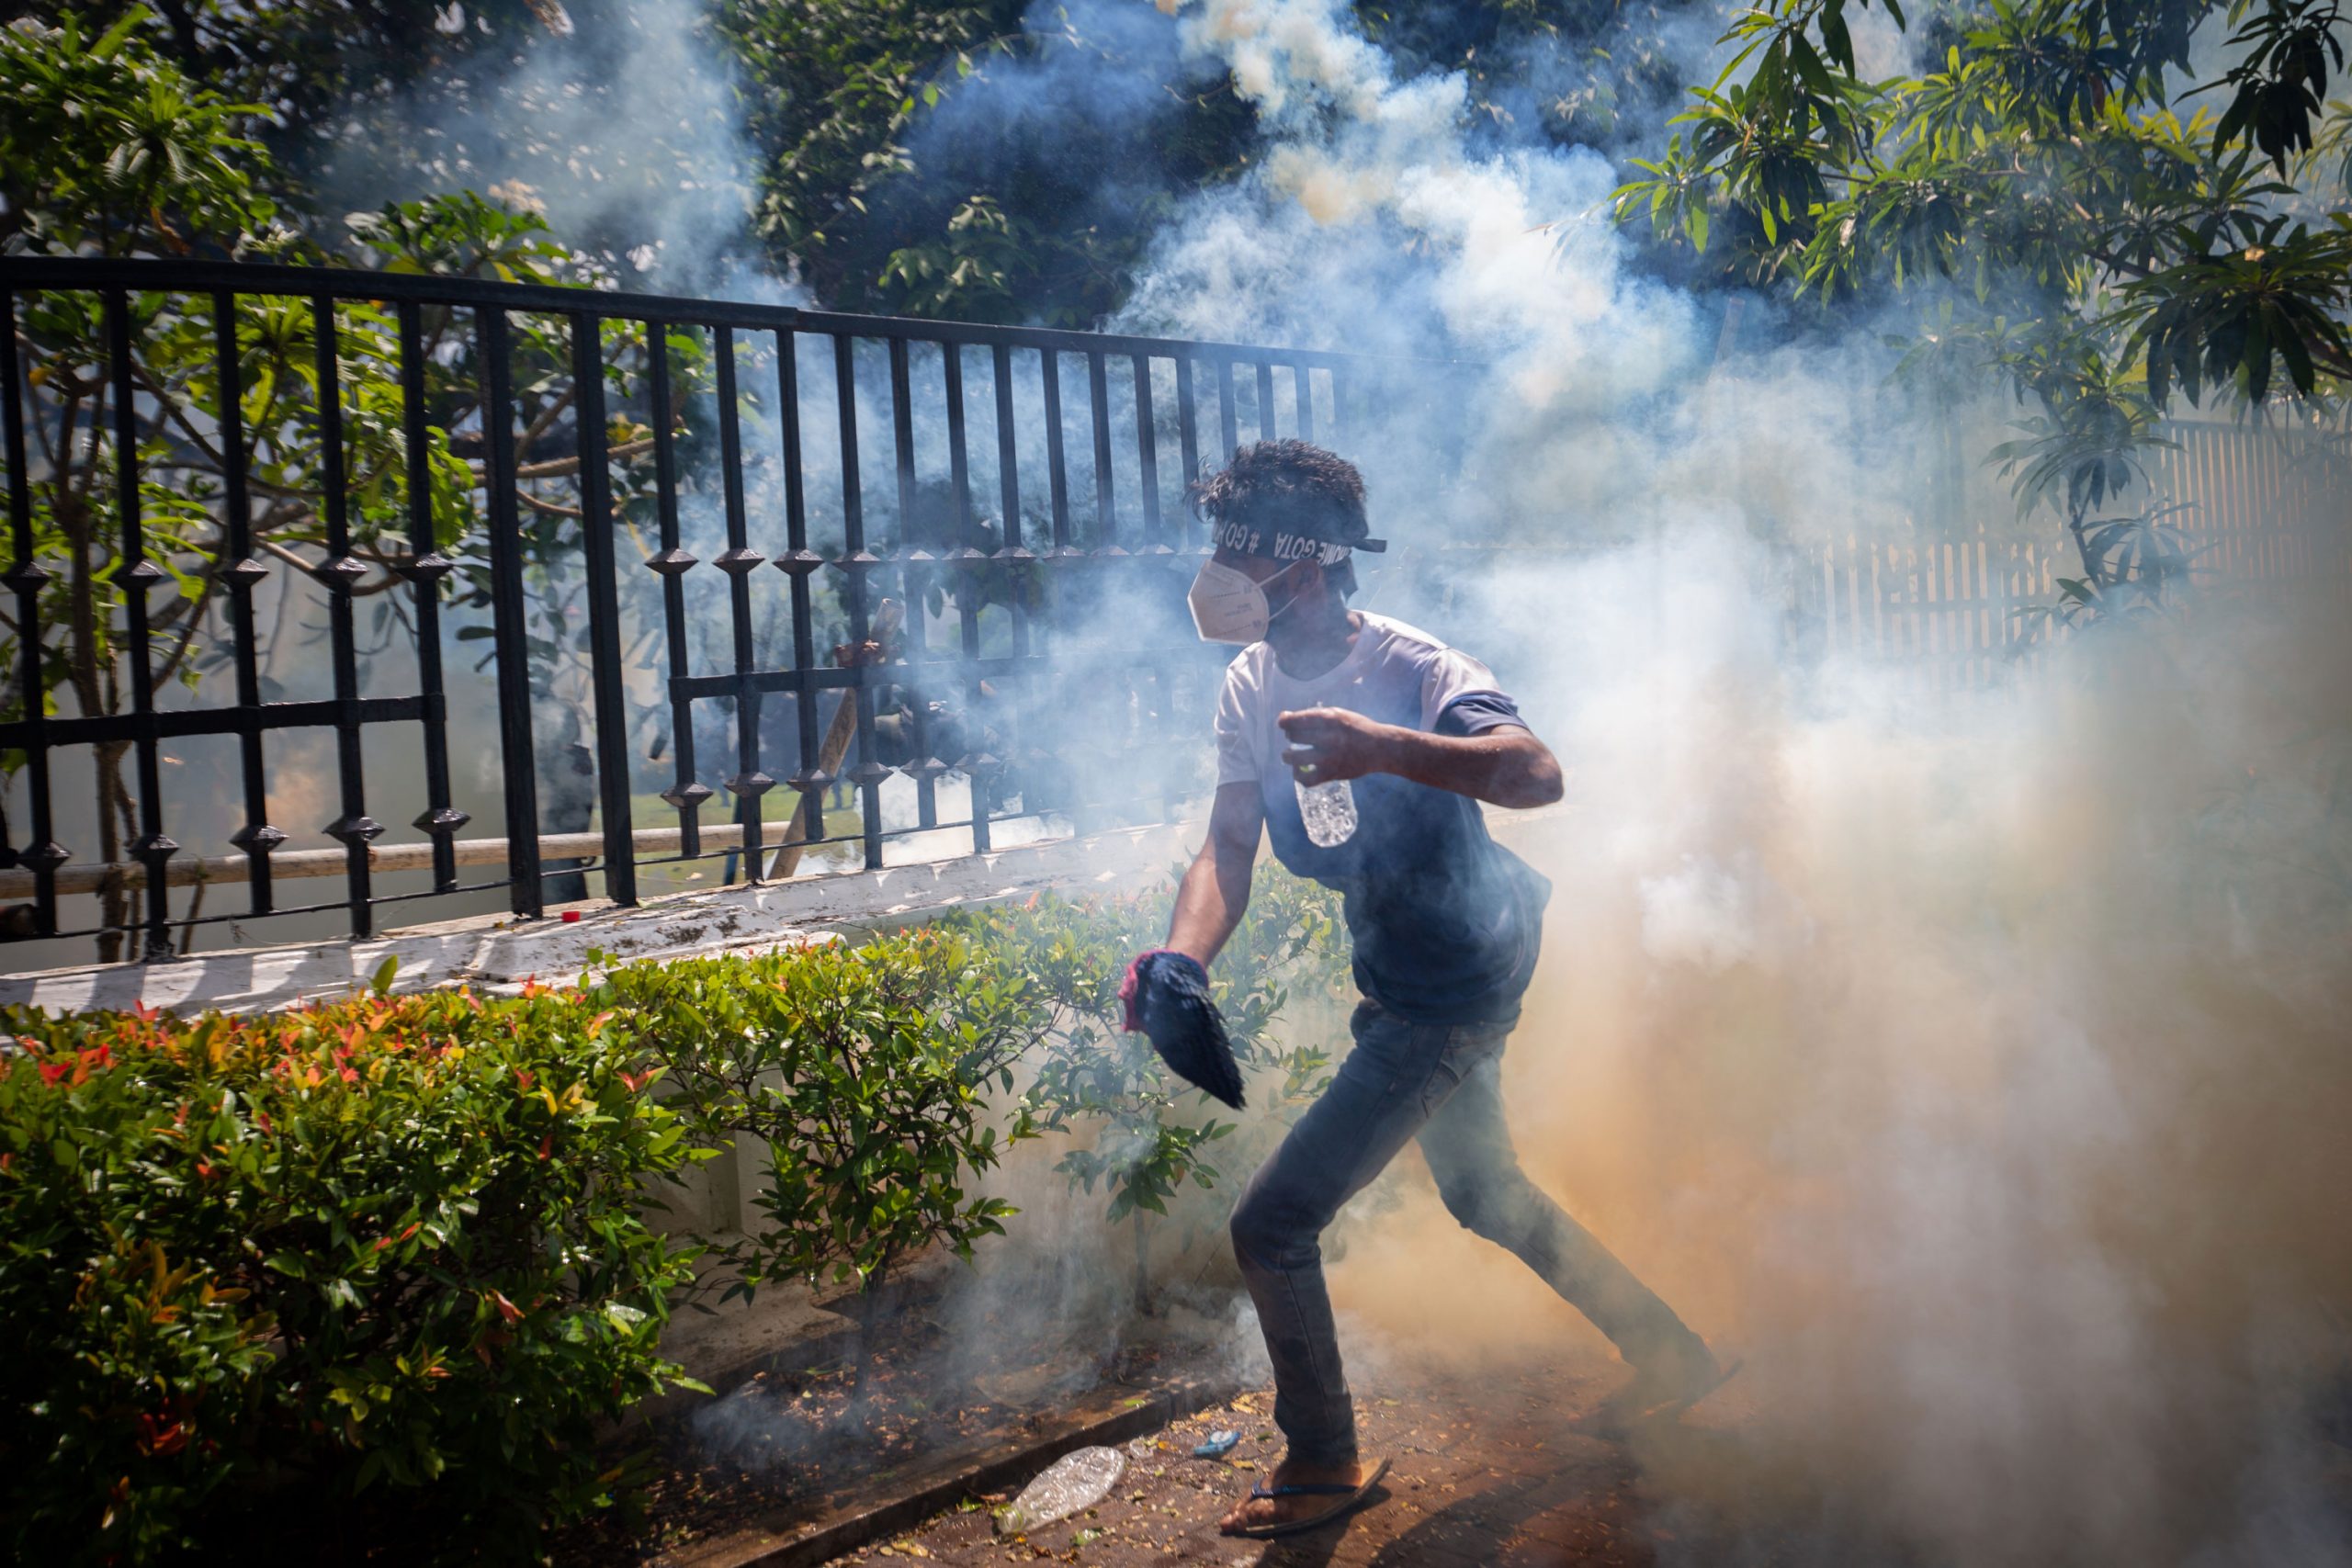 COLOMBO, SRI LANKA - JULY 13: A protestor runs for cover from a tear gas canister fired by army per...